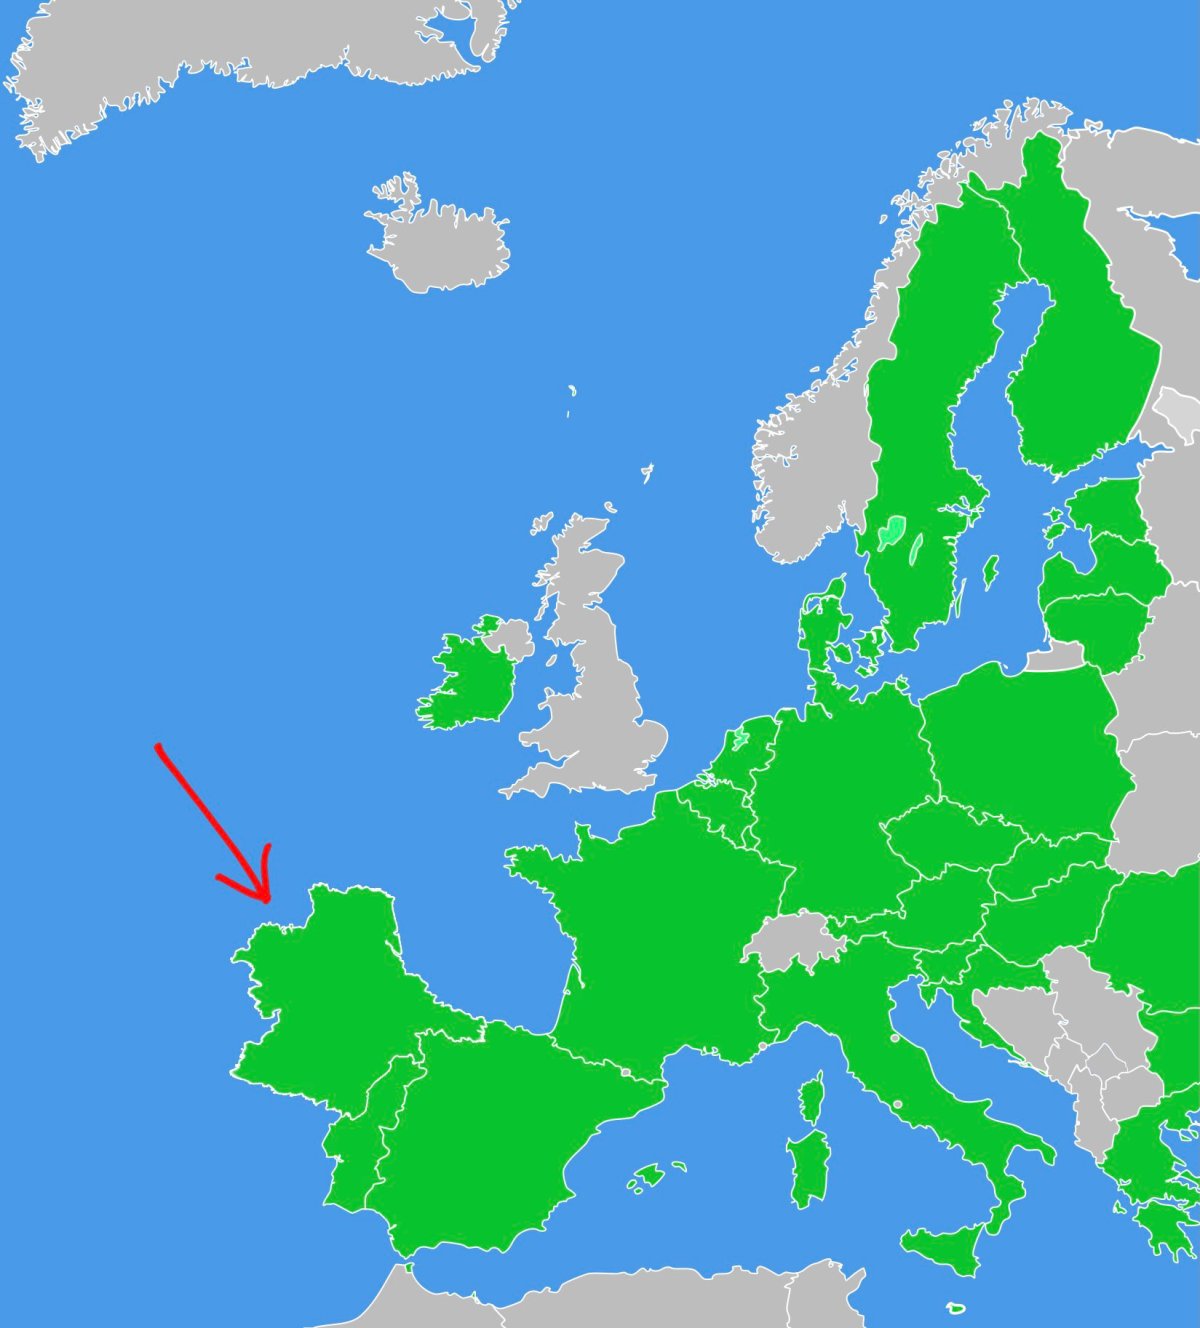 A photoshopped map of Europe showing the fictional country of Listenbourg, identified by a red arrow.